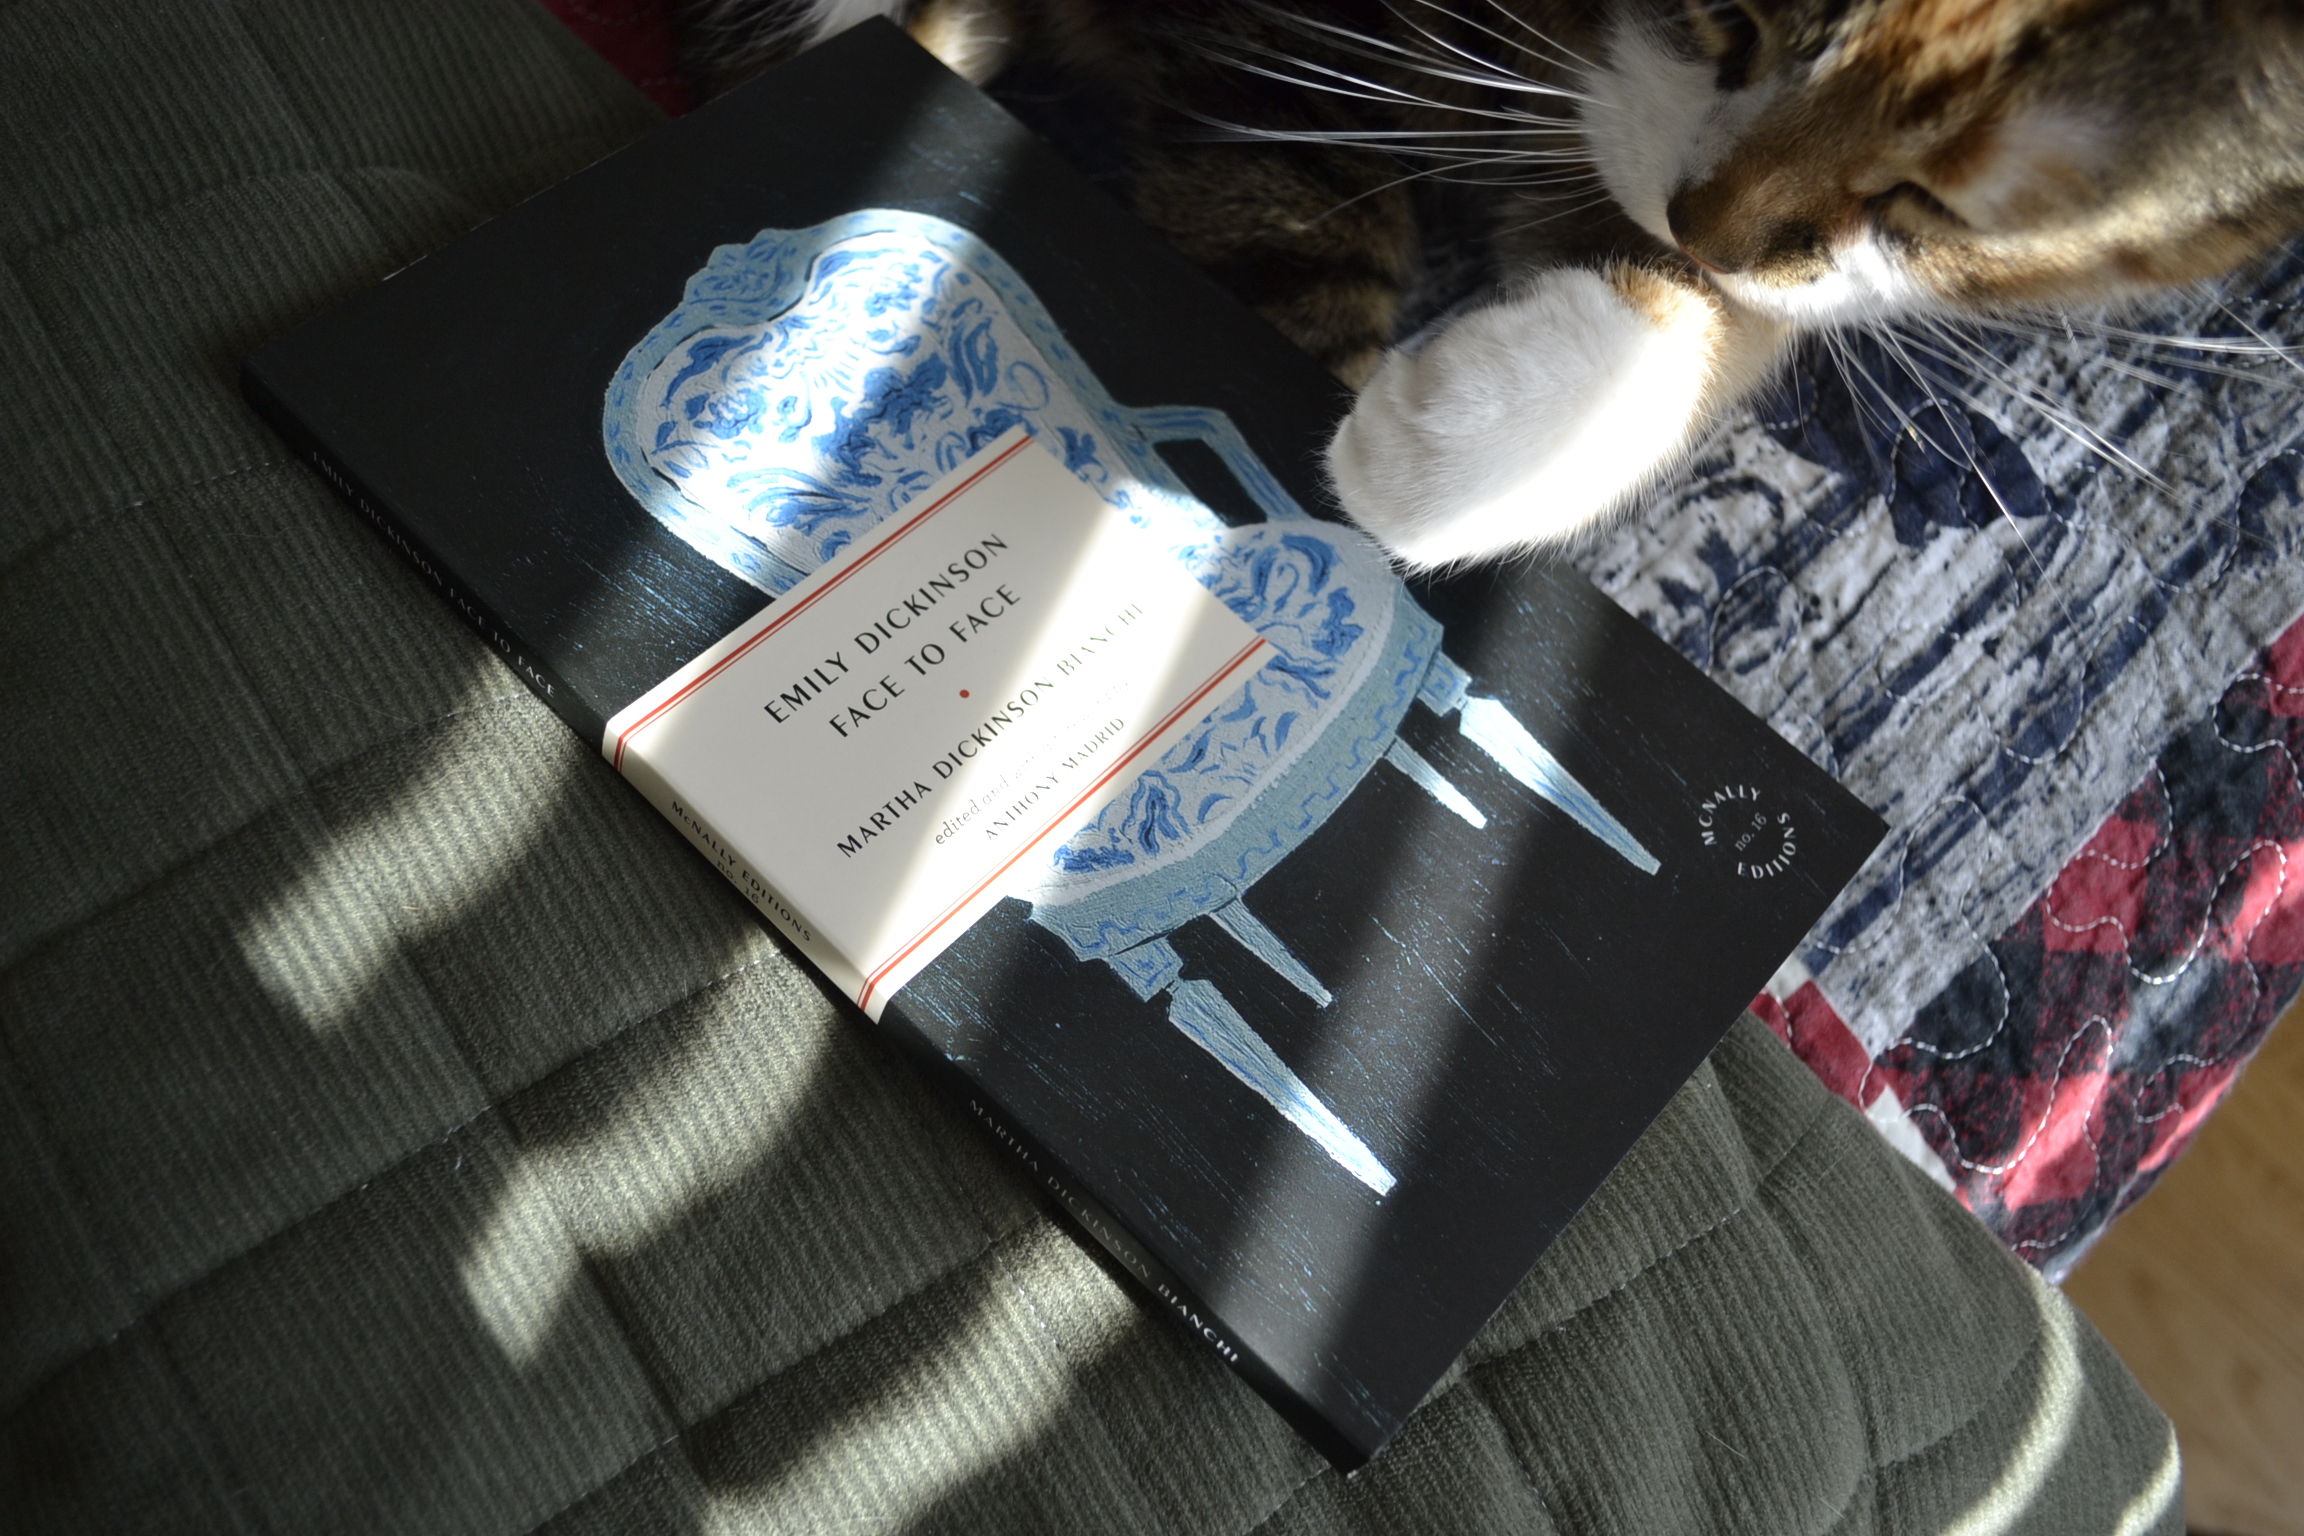 In slatted sunlight, a calico tabby rests one paw on top of the book Emily Dickinson Face to Face.